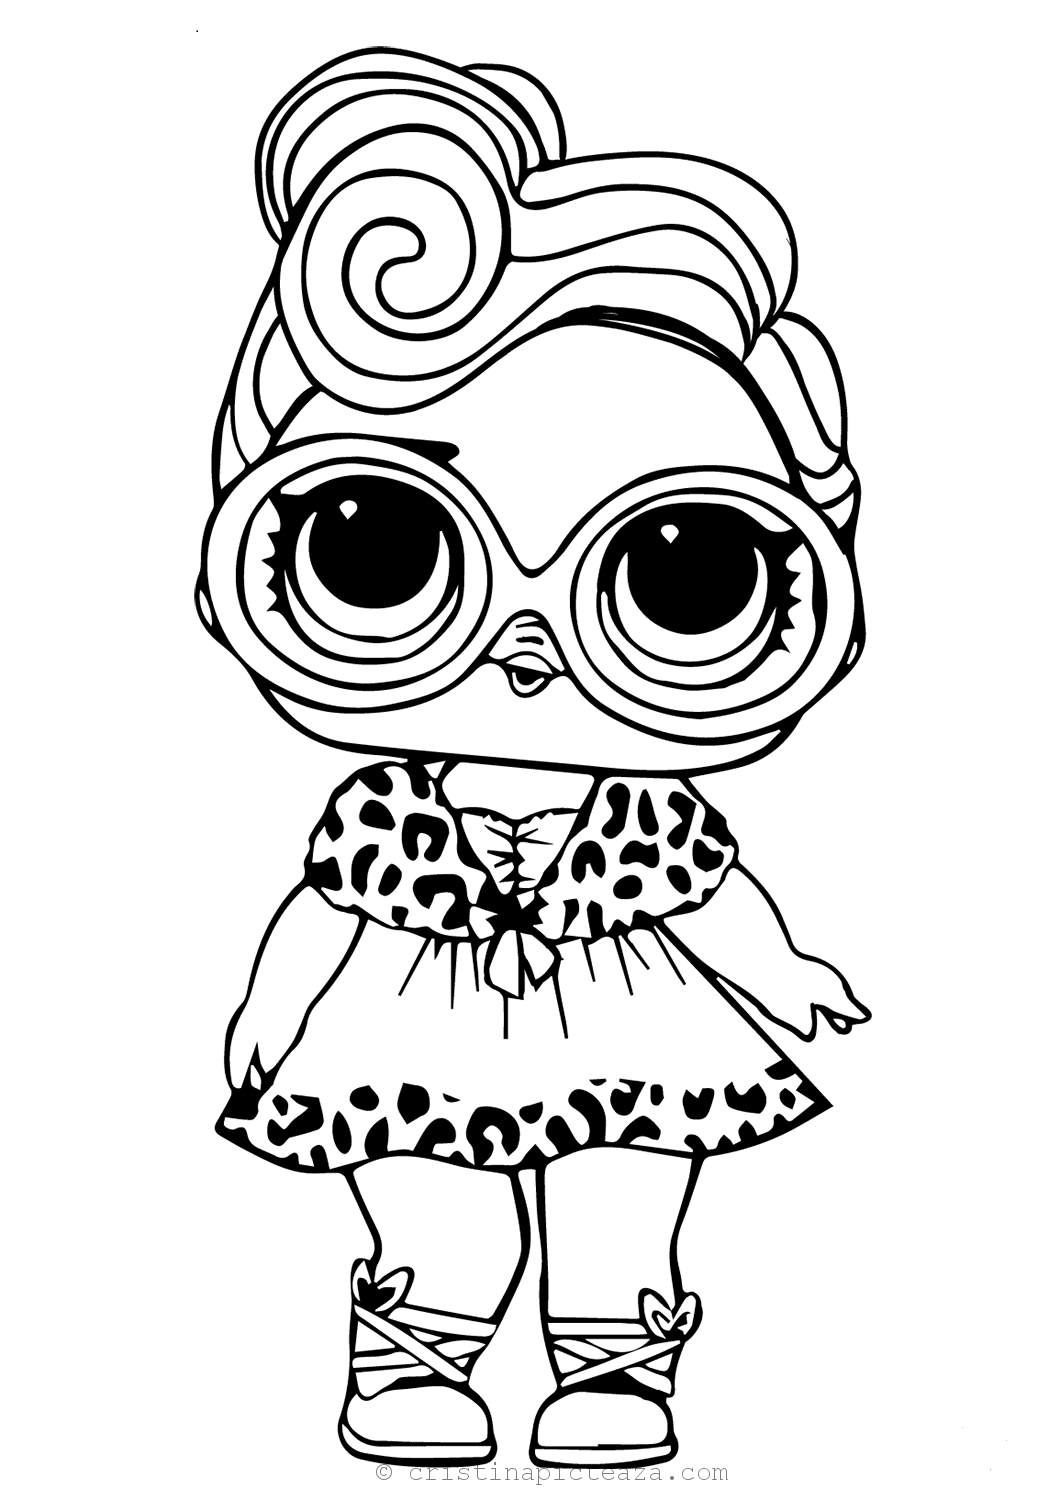 dolls coloring pages lol coloring pages lol dolls for coloring and painting dolls pages coloring 1 1